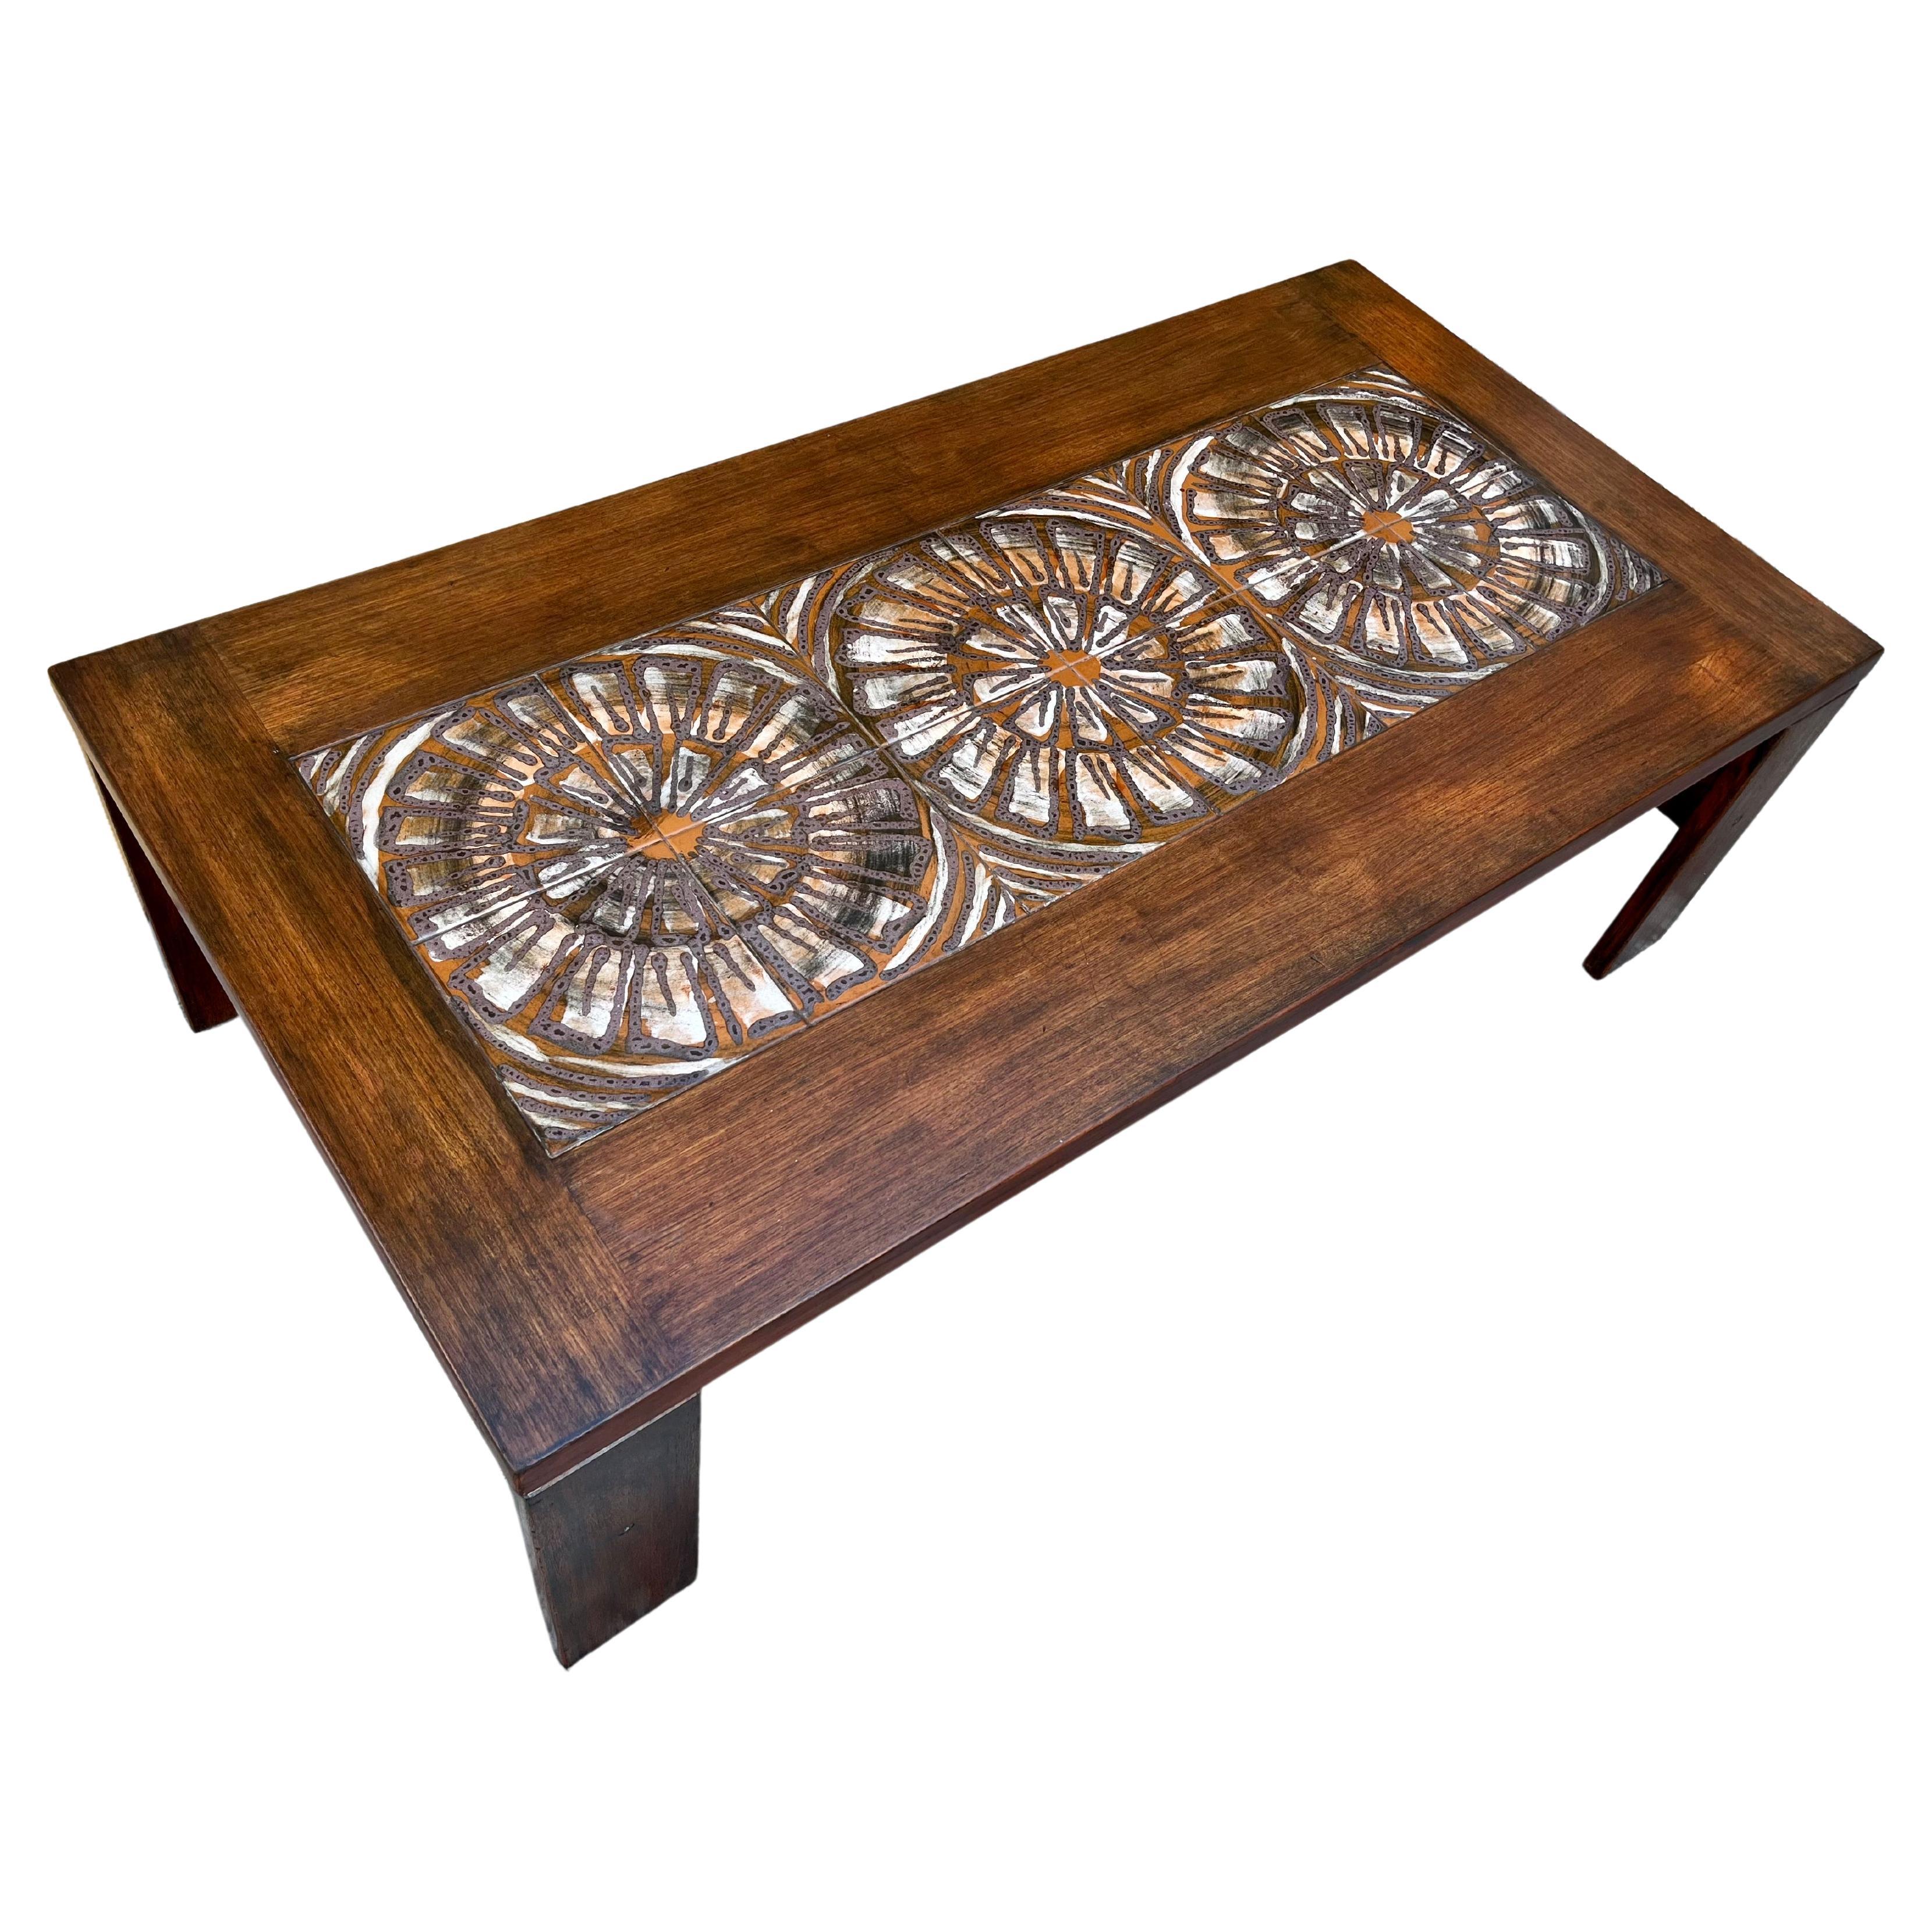 Danish Mid Century Modern Coffee Table With Ceramic Tile Inlays. Circa 1960s  For Sale